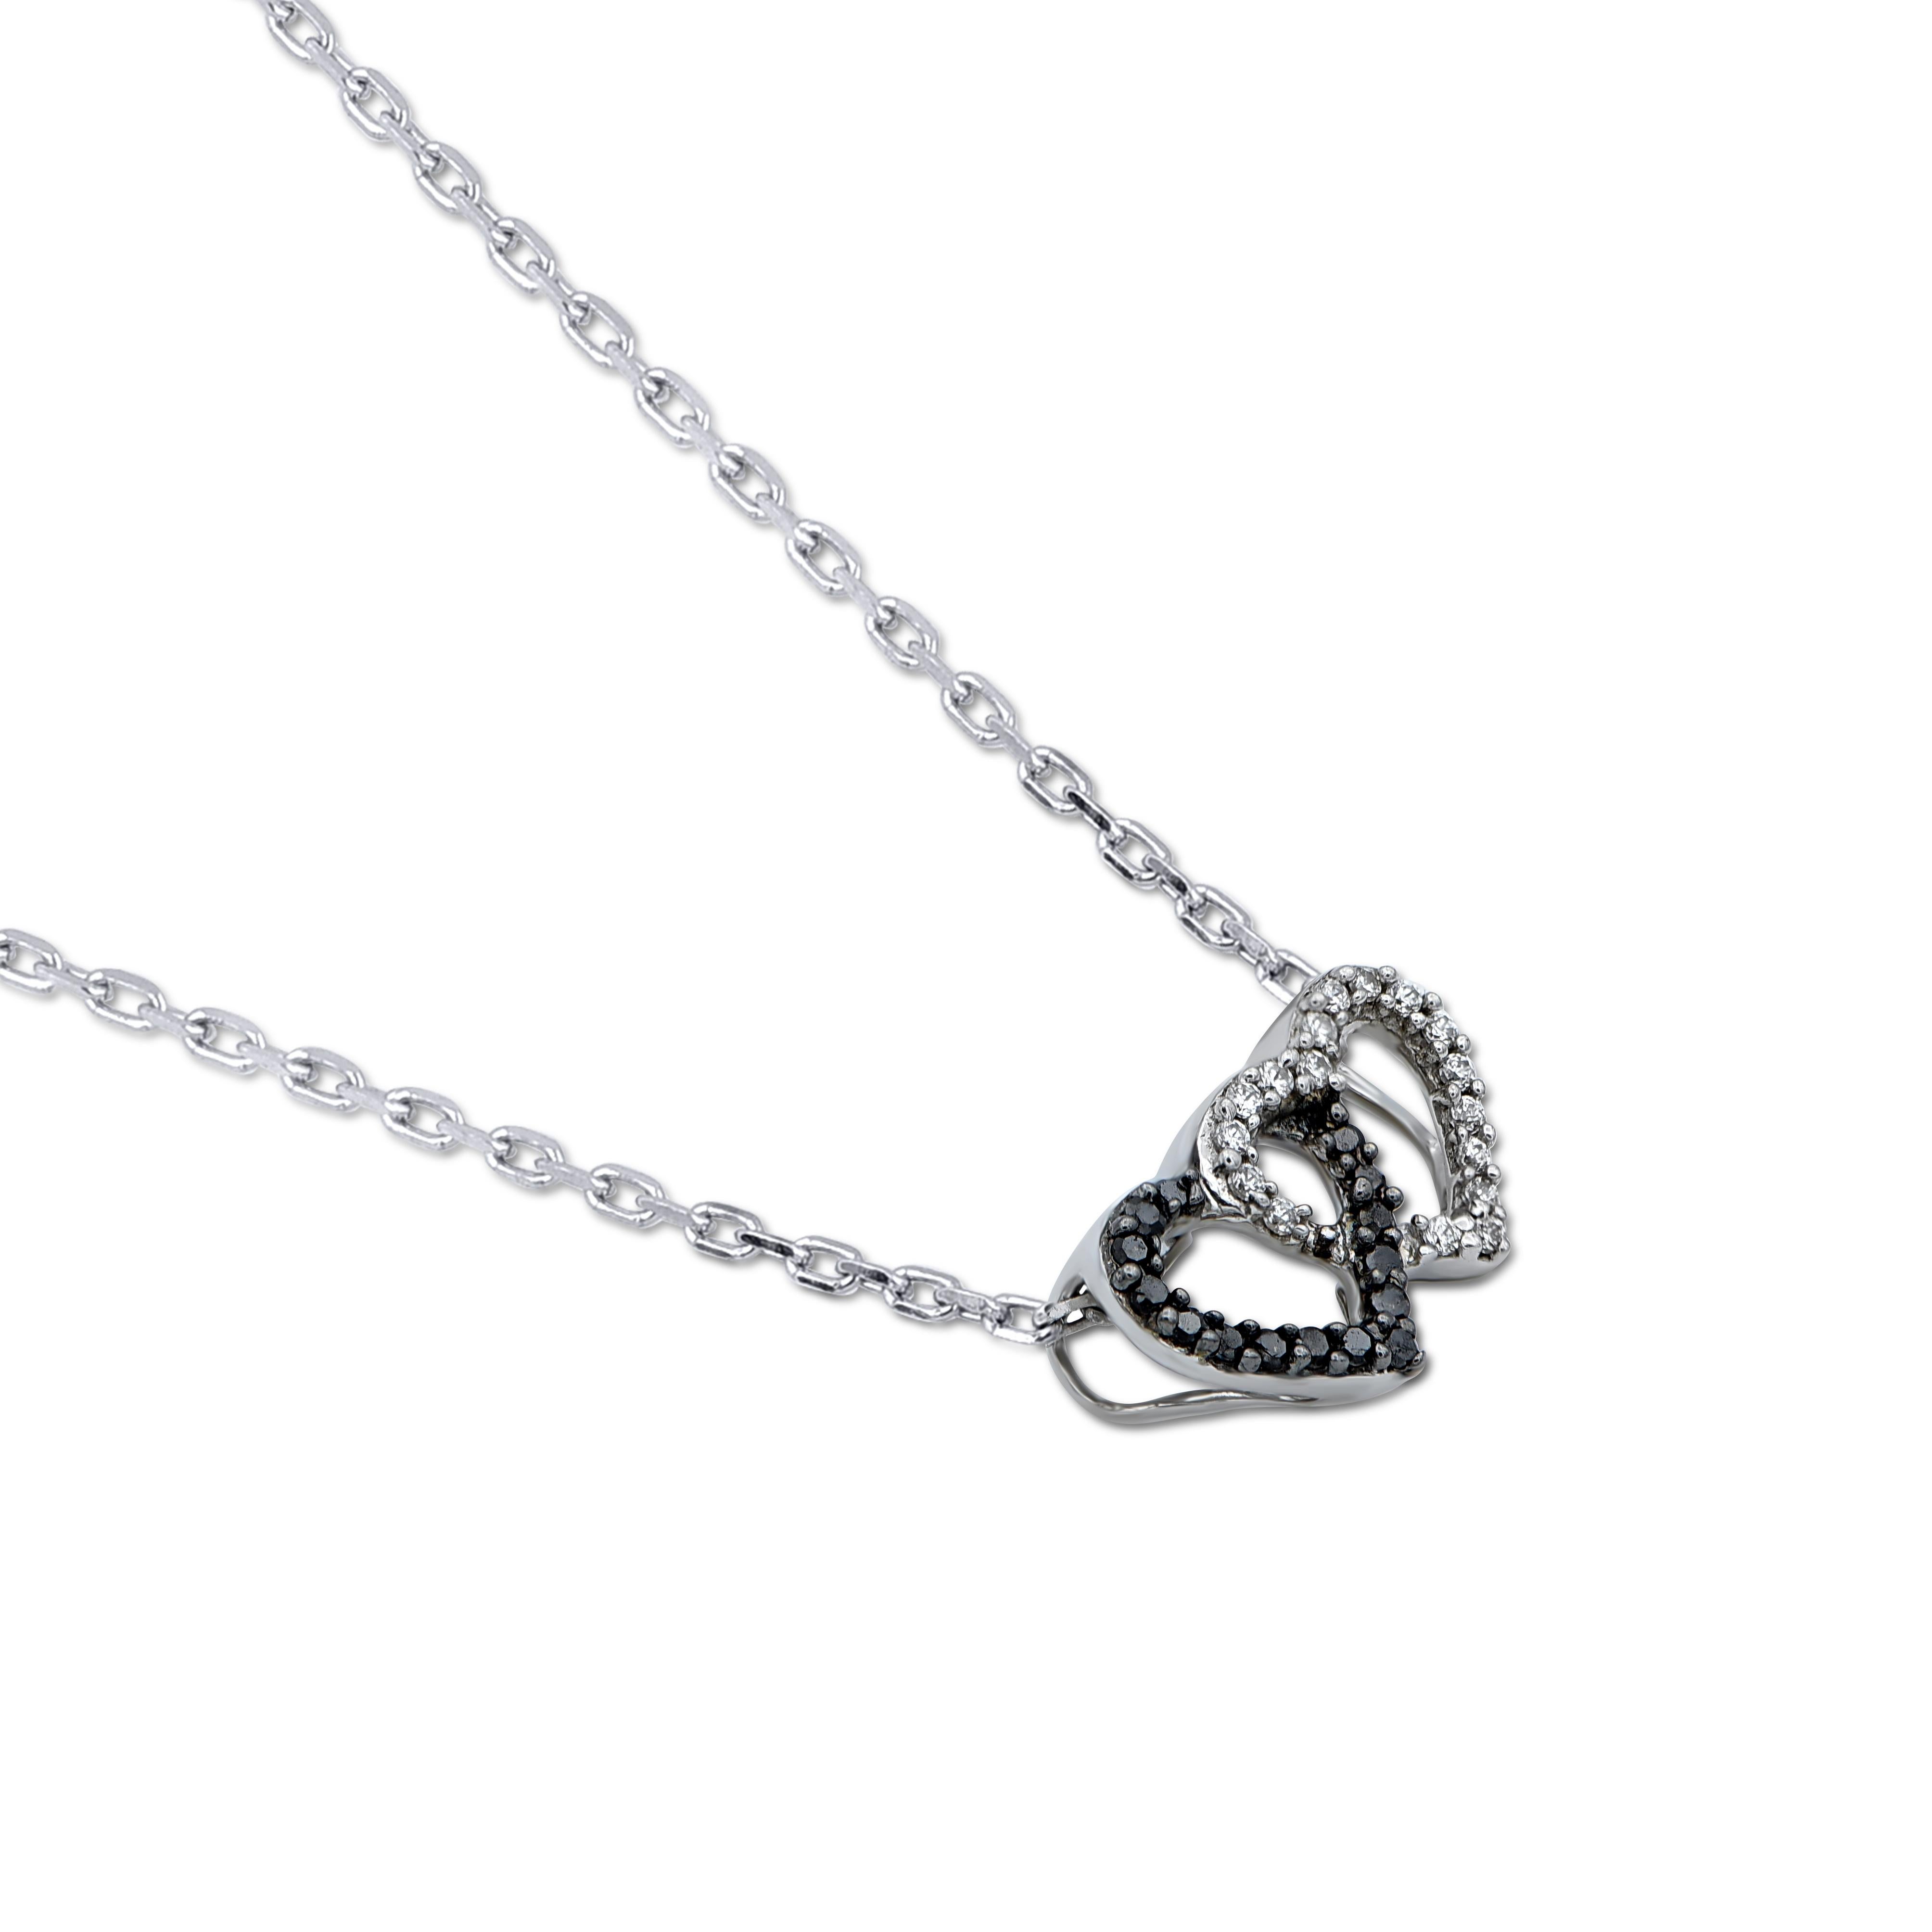 A striking addition when worn on its own, this diamond pendant makes a stunning impression. This heart pendant is crafted from 14-karat white gold and features 32 single cut & black treated diamonds set in prong setting. H-I color I-2 clarity and a